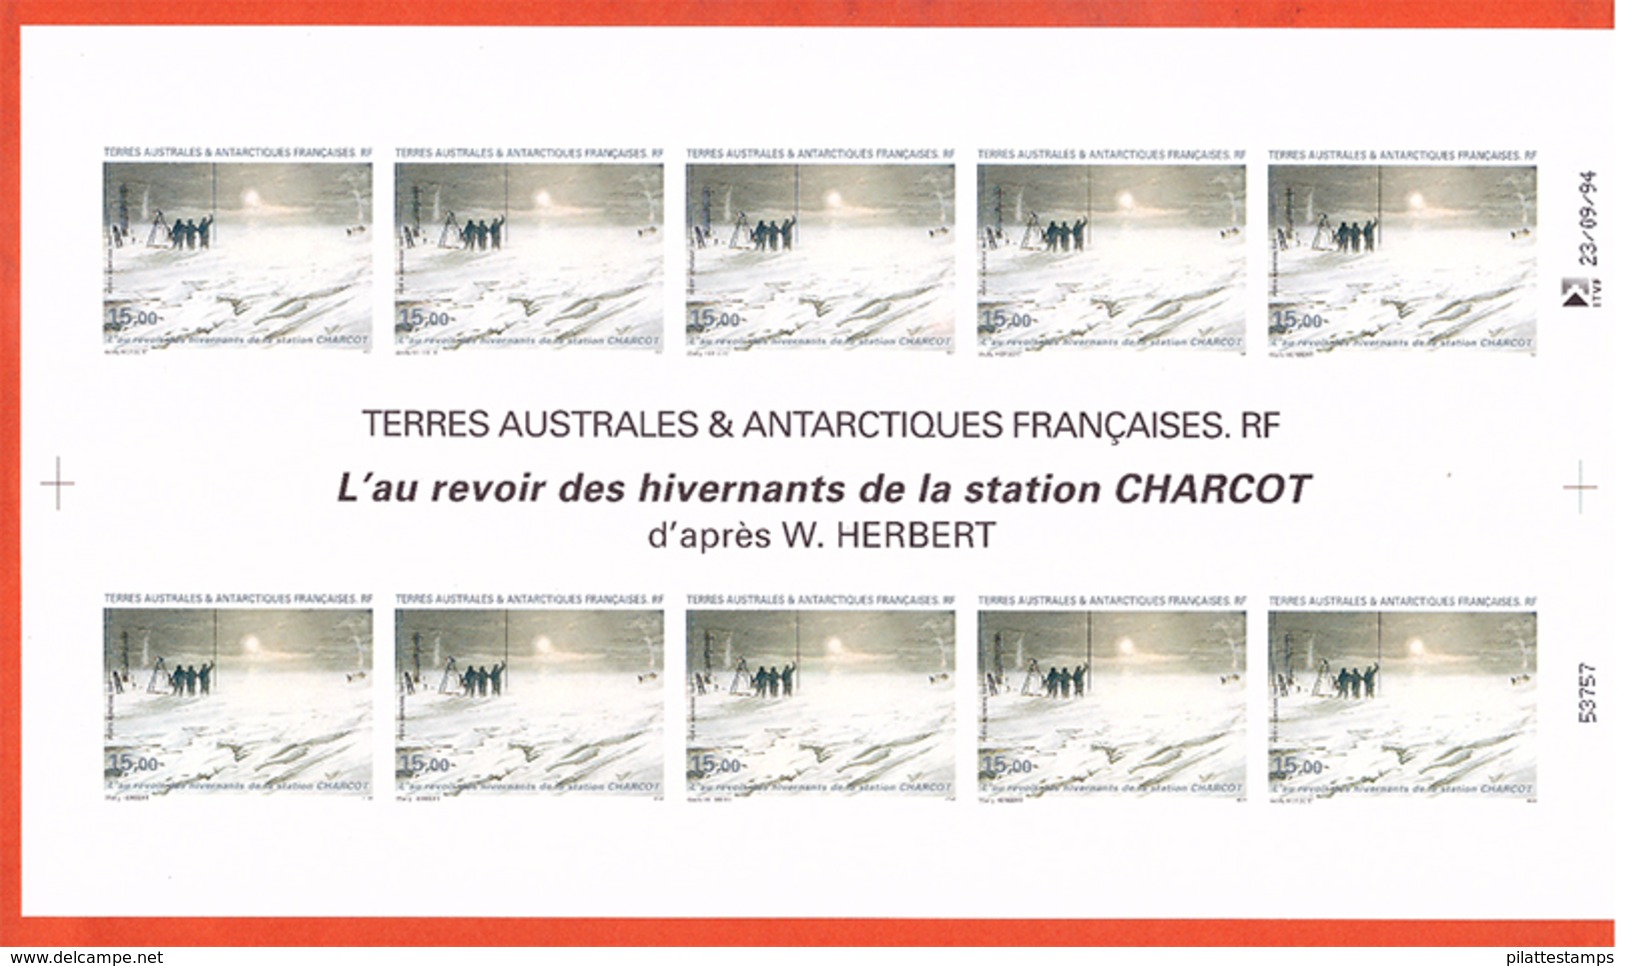 TERRES AUSTRALES PA N°135 STATION CHARCOT FEUILLE NON DENTELEE - Imperforates, Proofs & Errors